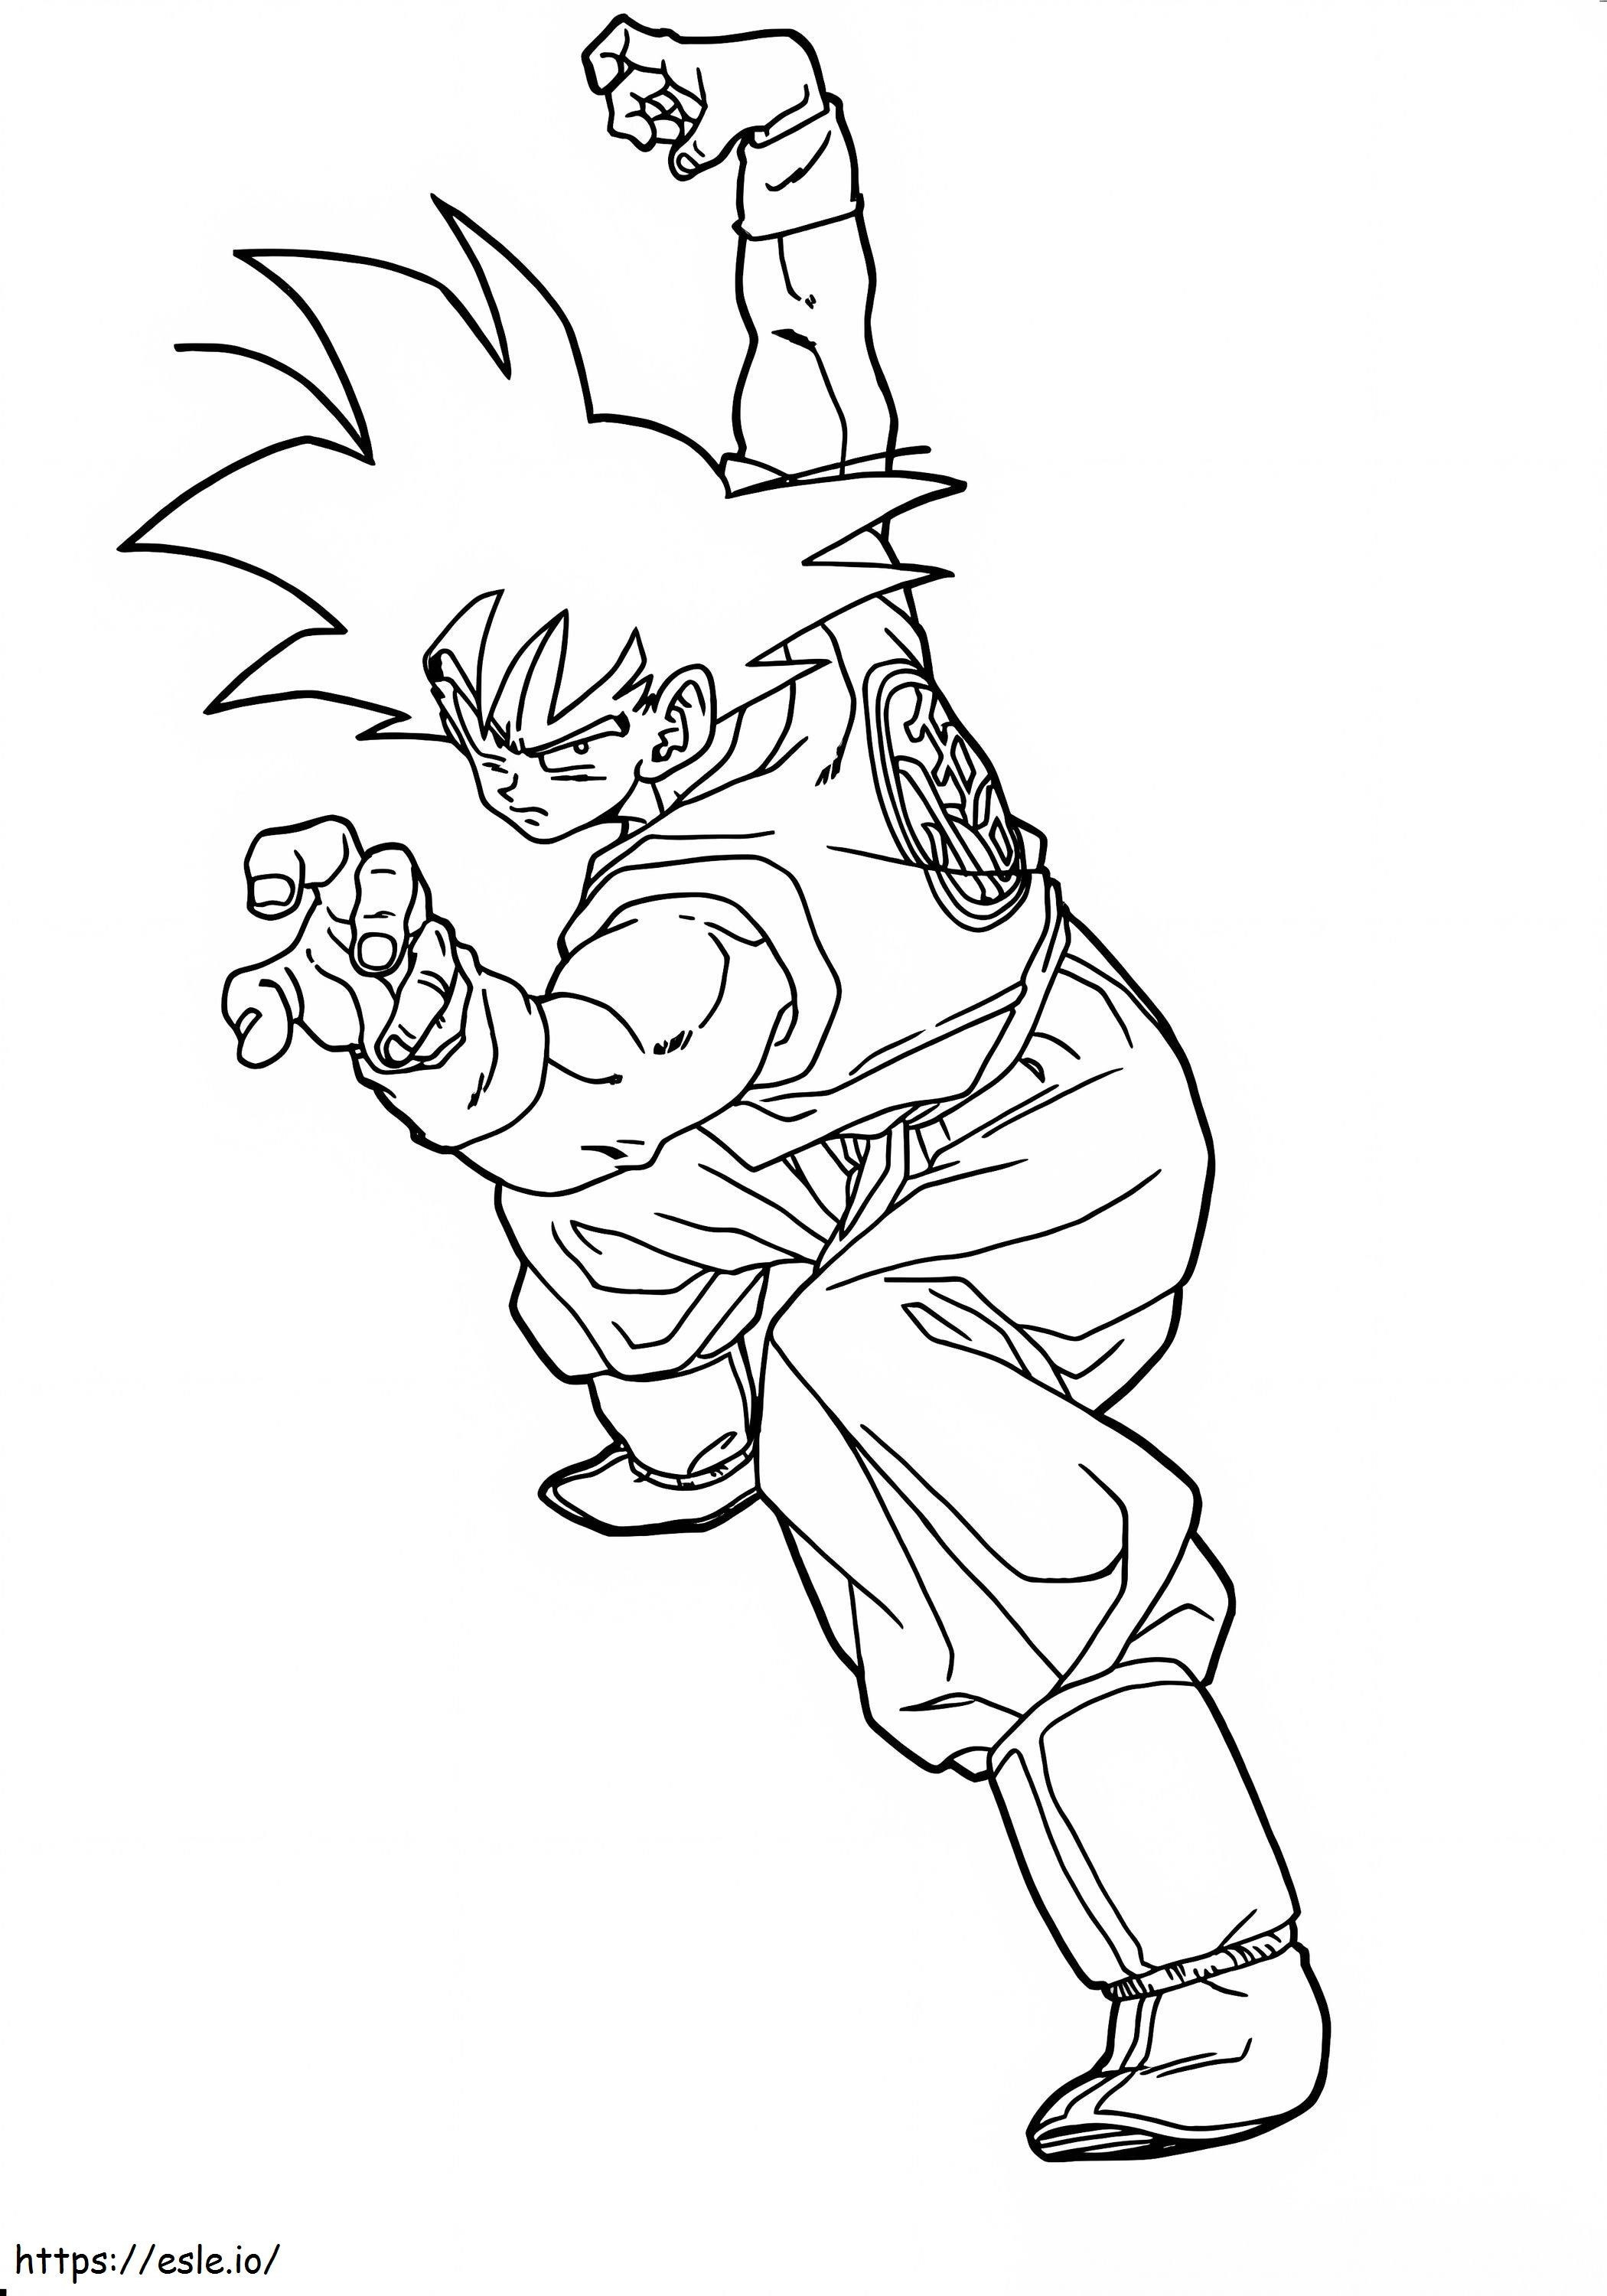 Goku Fighting coloring page